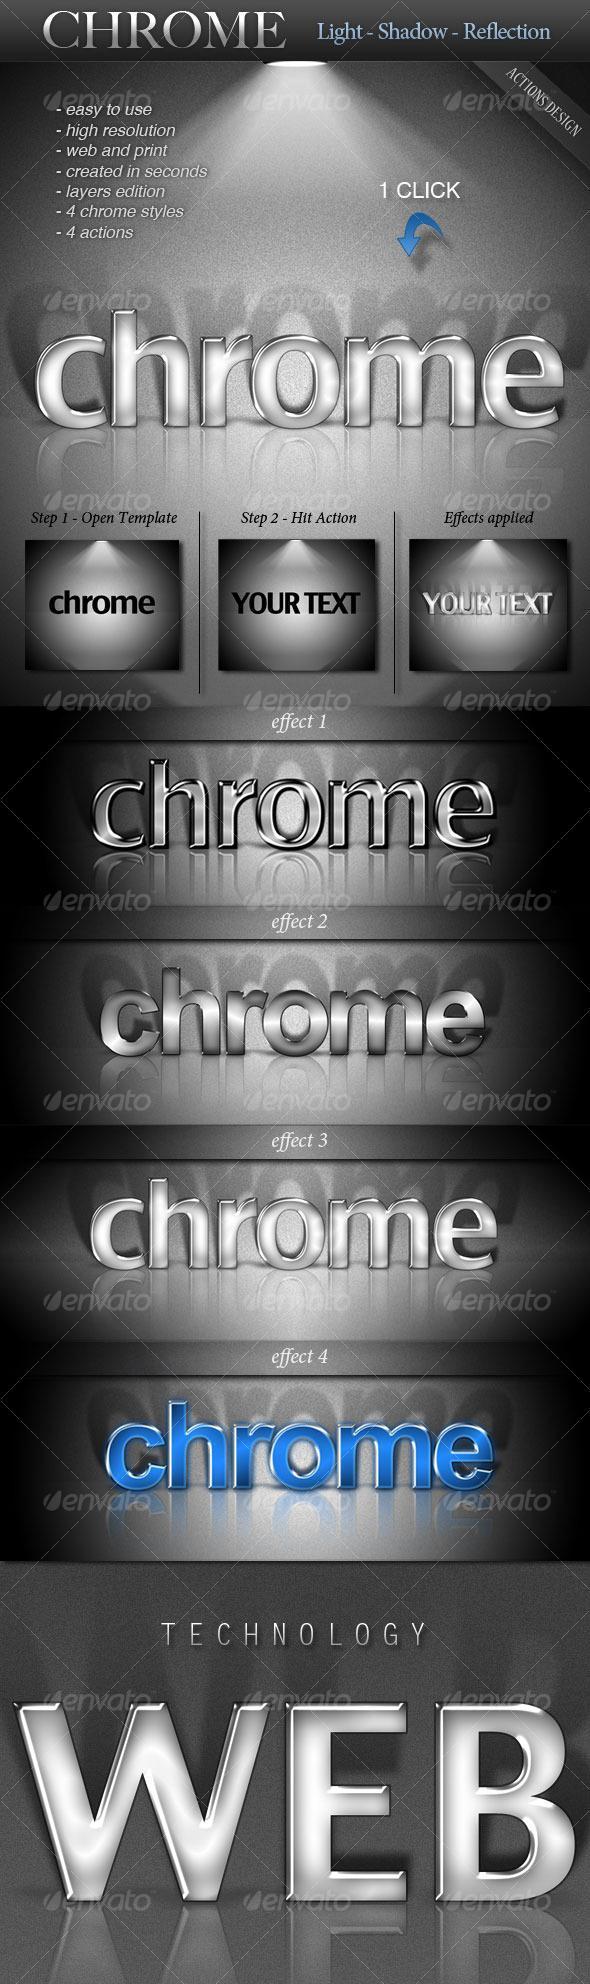 Chrome Text Light Shadow Reflection Photoshop Action